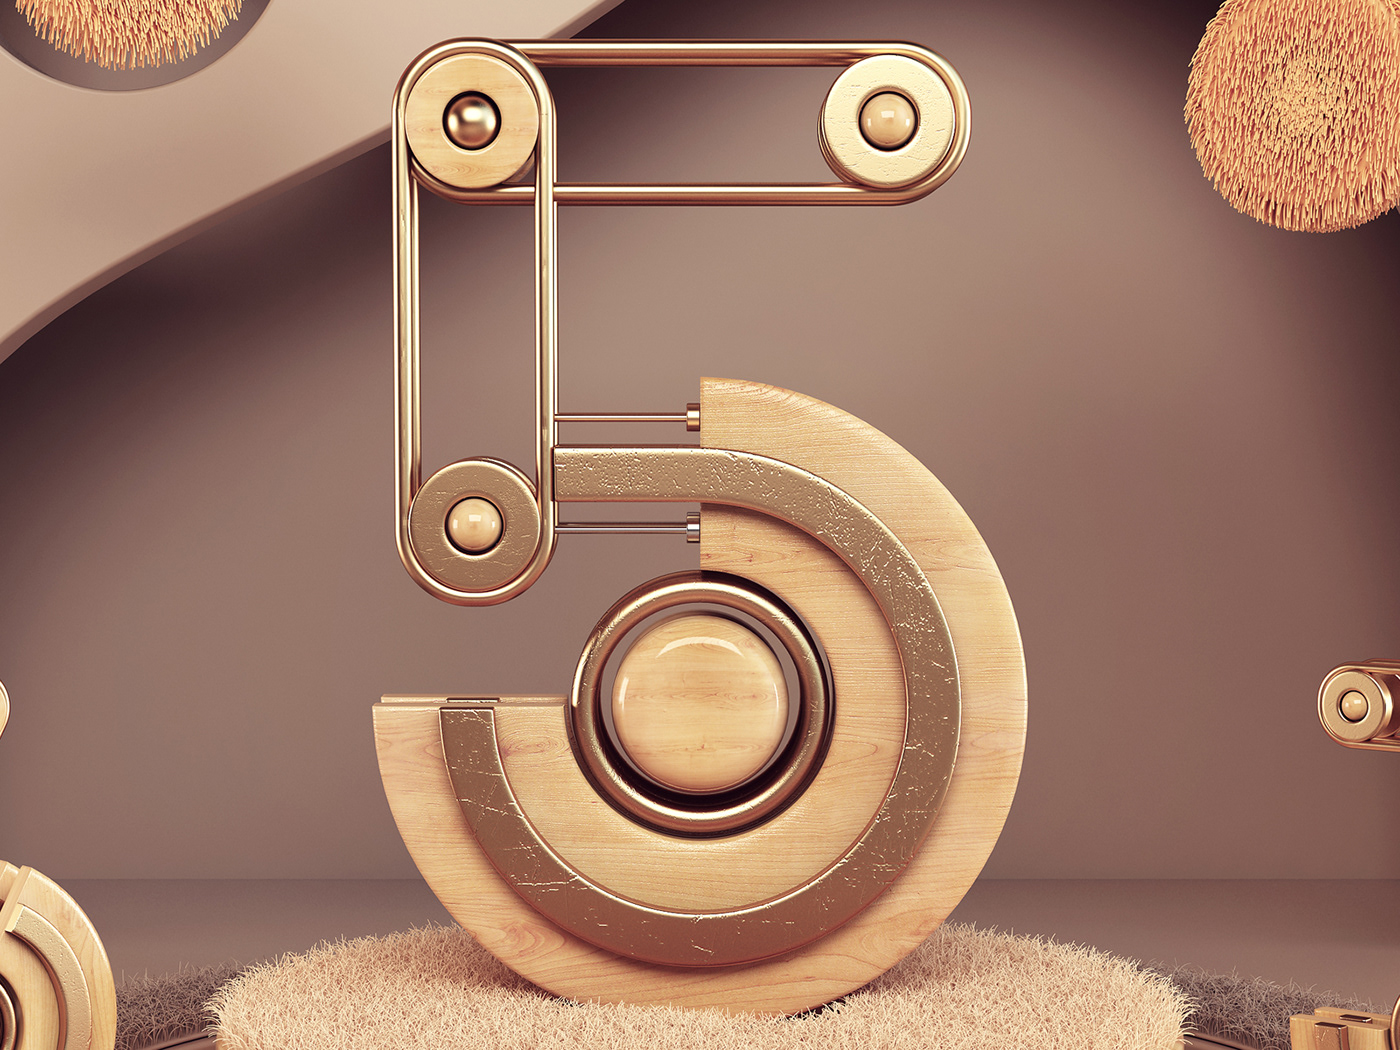 3dsmax abstract art numbers poster print Render vray webshocker